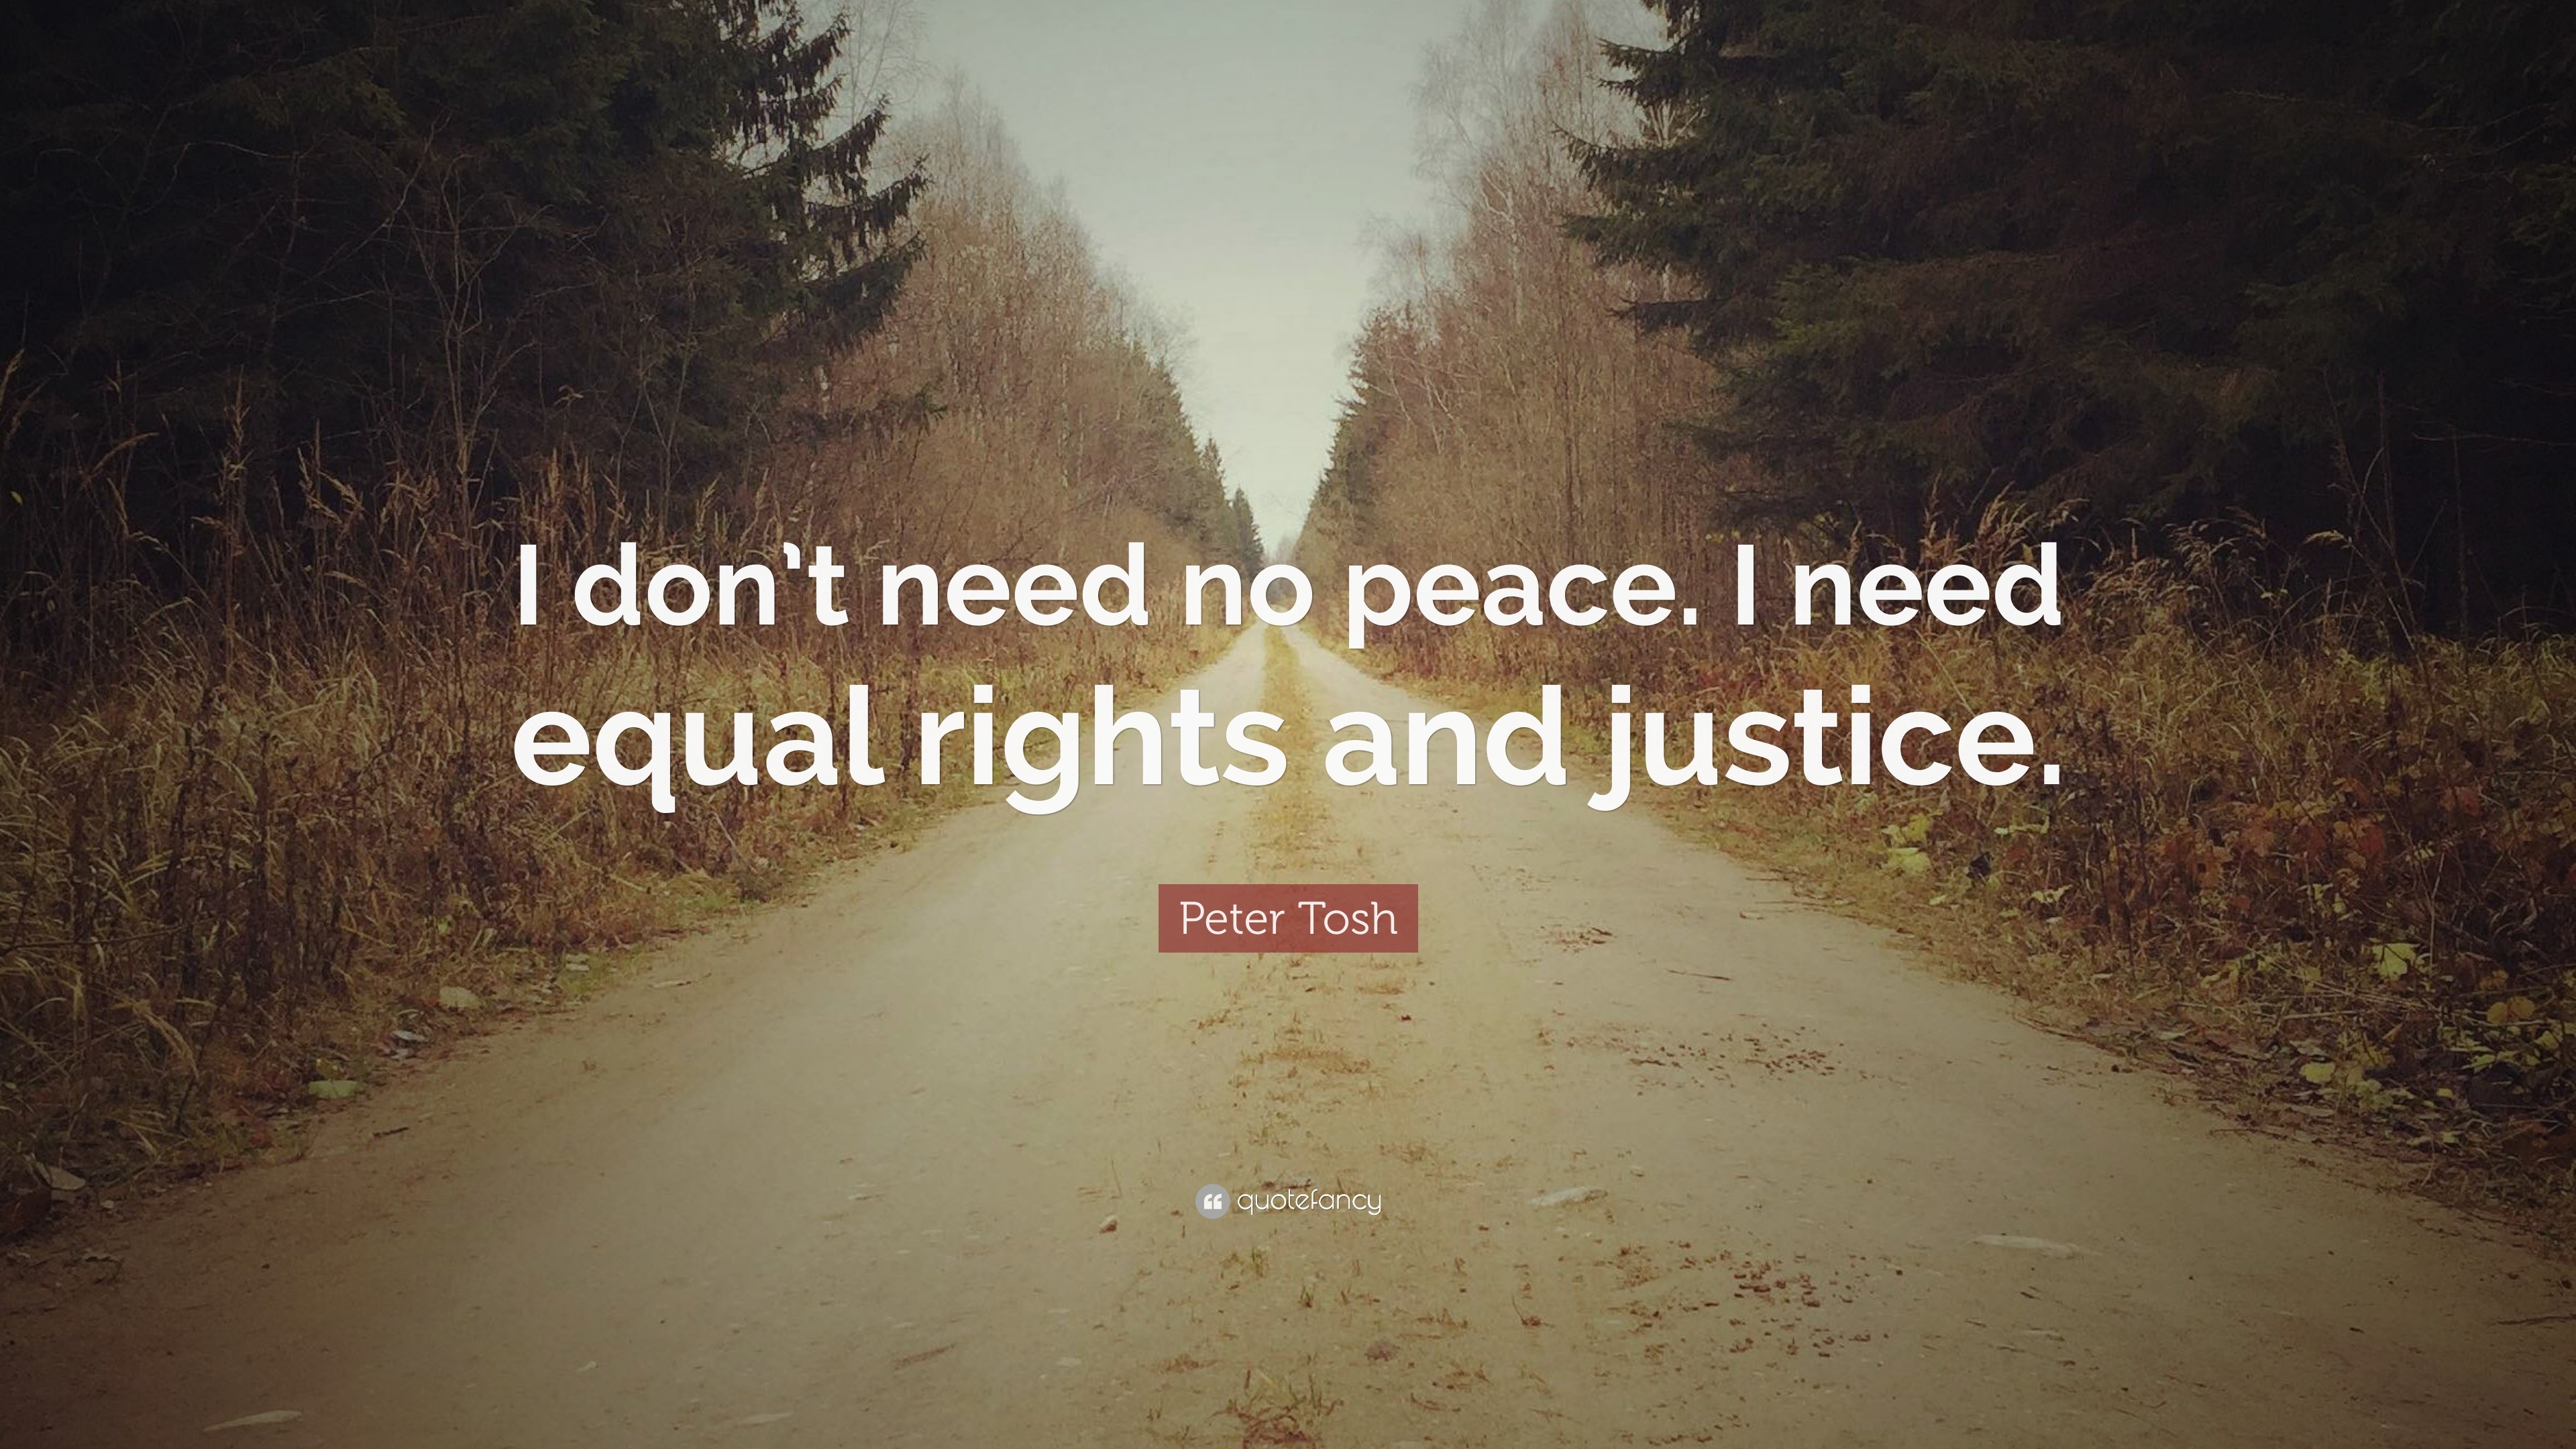 Peter Tosh Quote: “I don't need no peace. I need equal